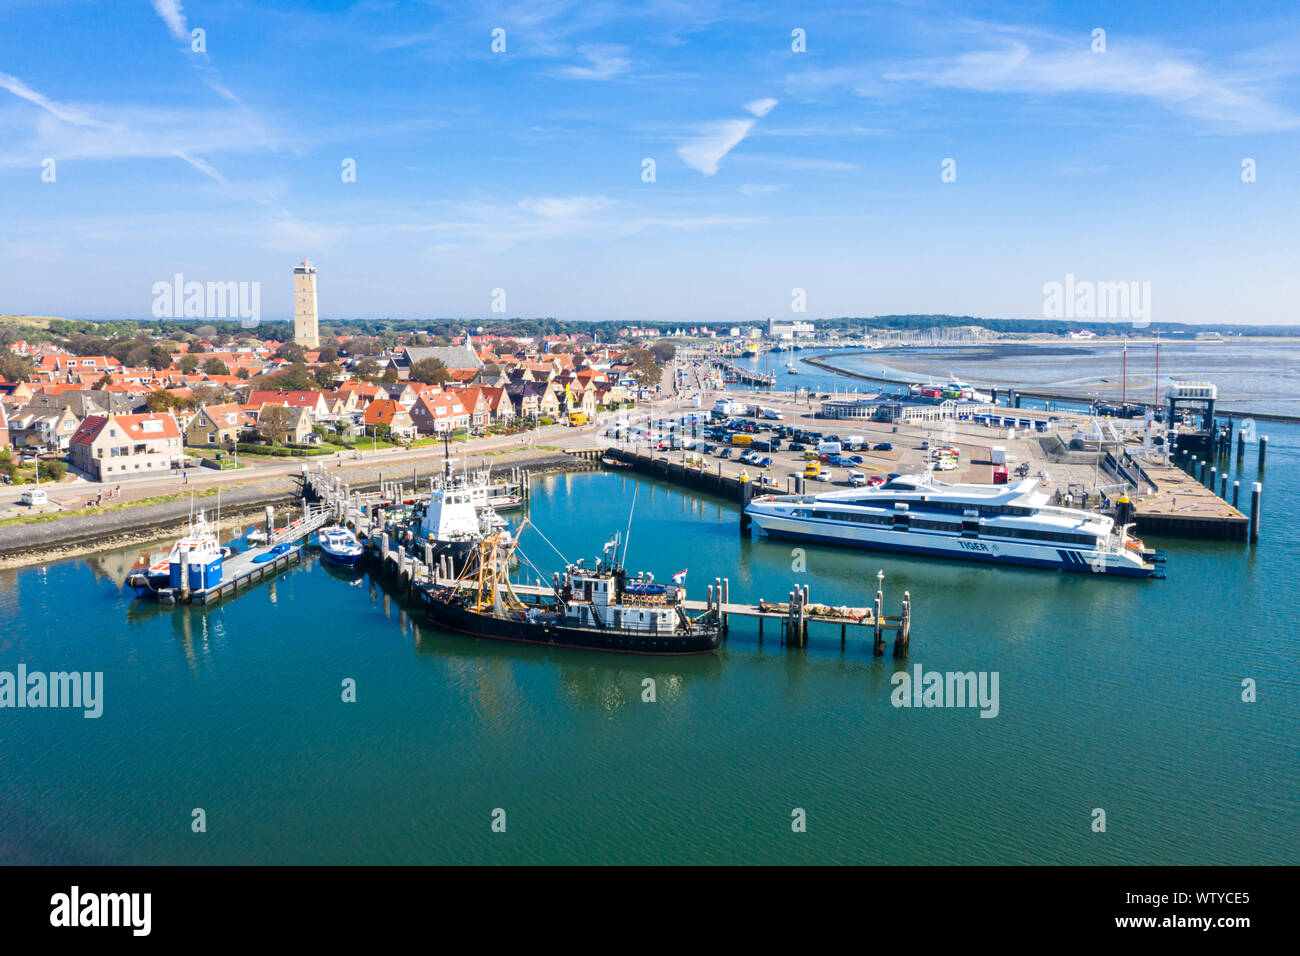 Netherlands, Terschelling - Aug 25, 2019: Brandaris lighthouse towers up. Catamaran MS Tiger moored to a wharf and other vessels along piers, in the h Stock Photo